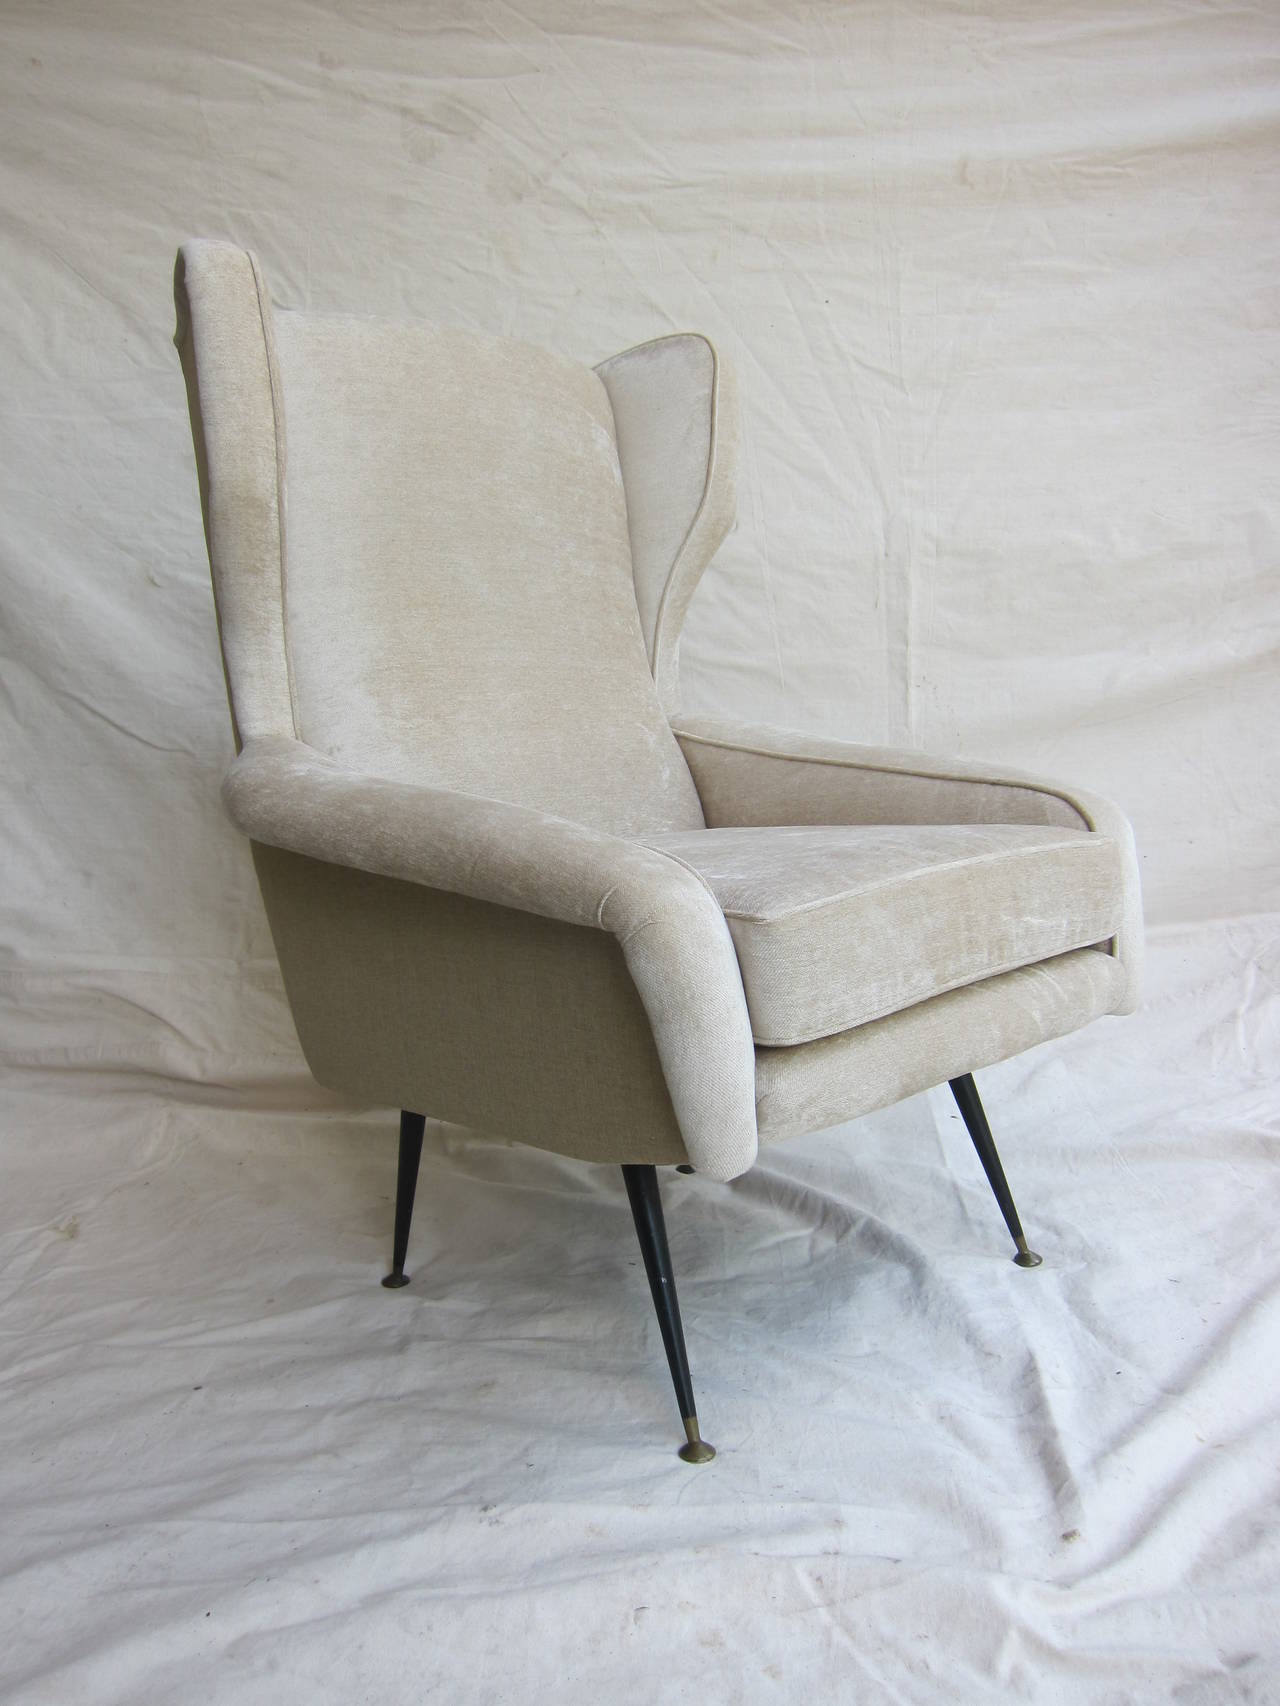 1950 Italian Winged Lounge Chair in the style of Gianfranco Frattini.  Wonderful style with great comfort.  Newly upholstered.